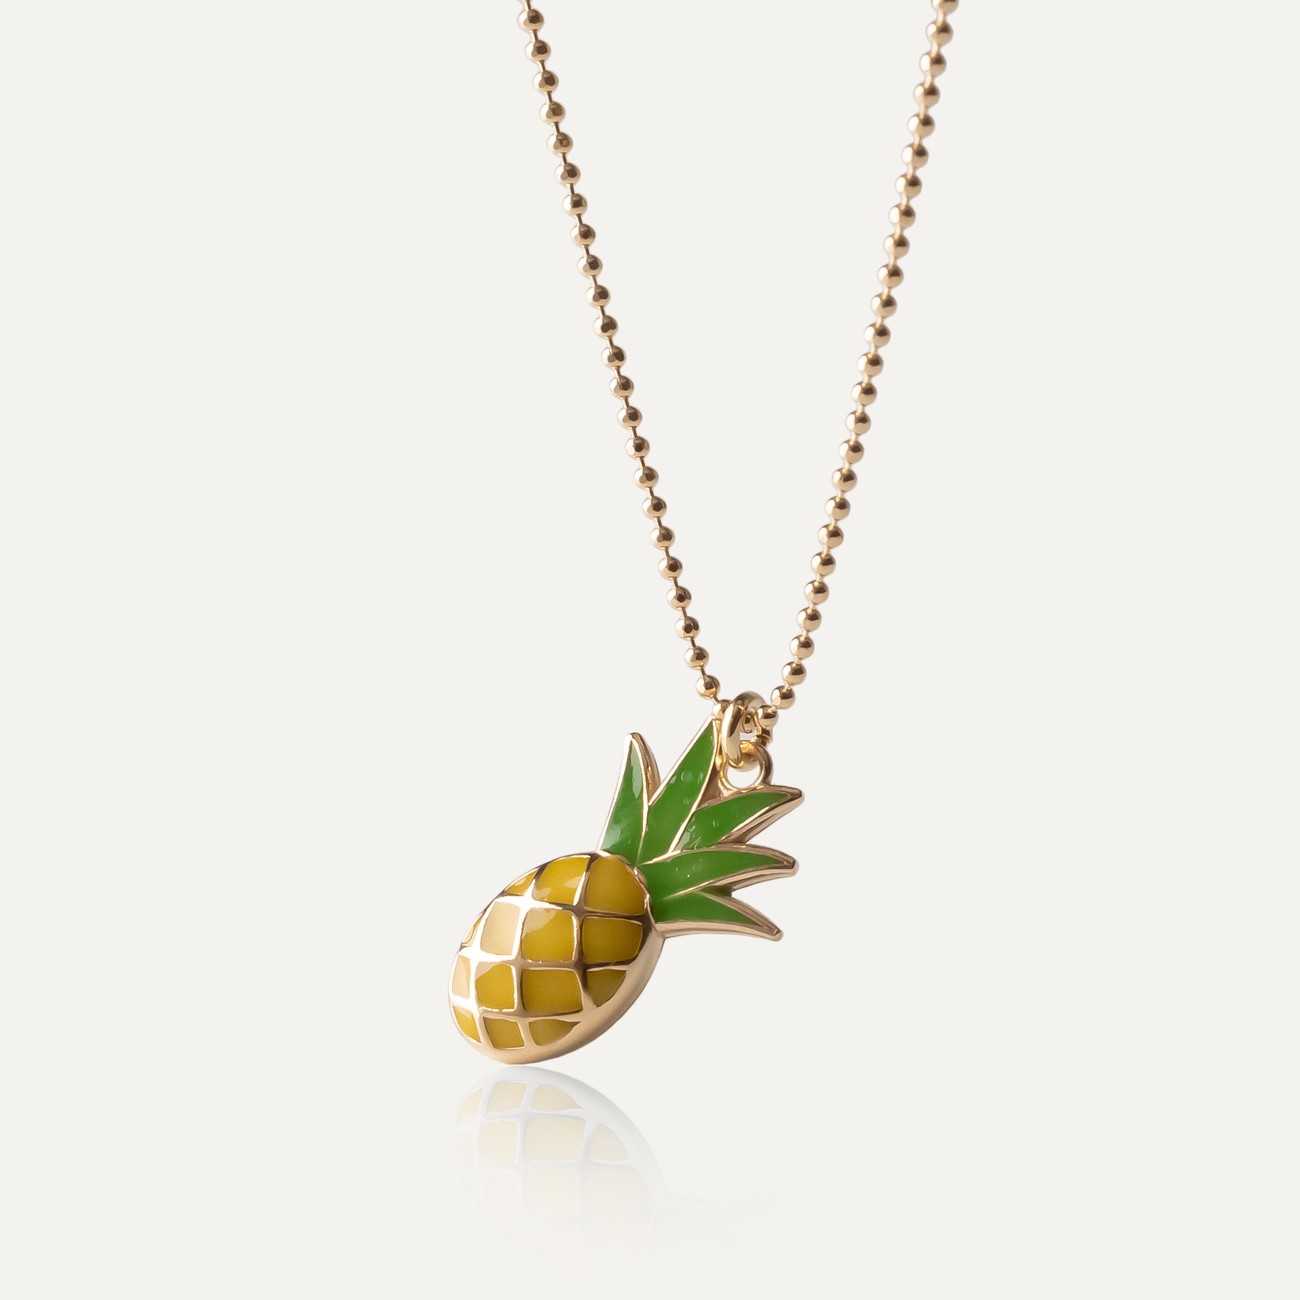 Pineapple necklace, sterling silver 925